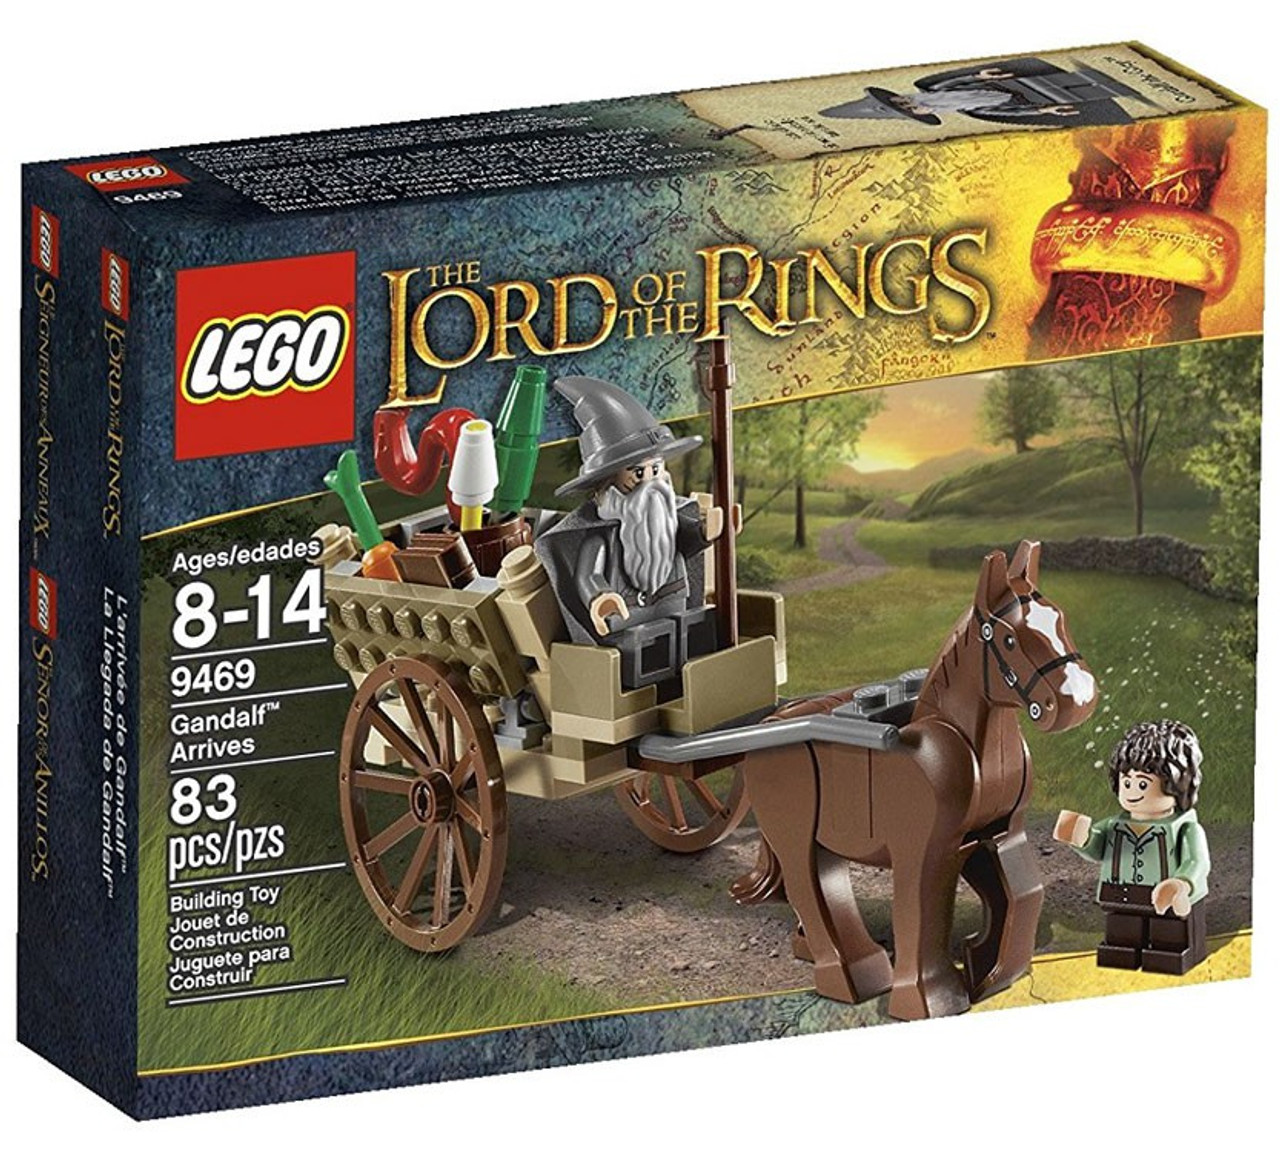 dlc character lego lord of the rings